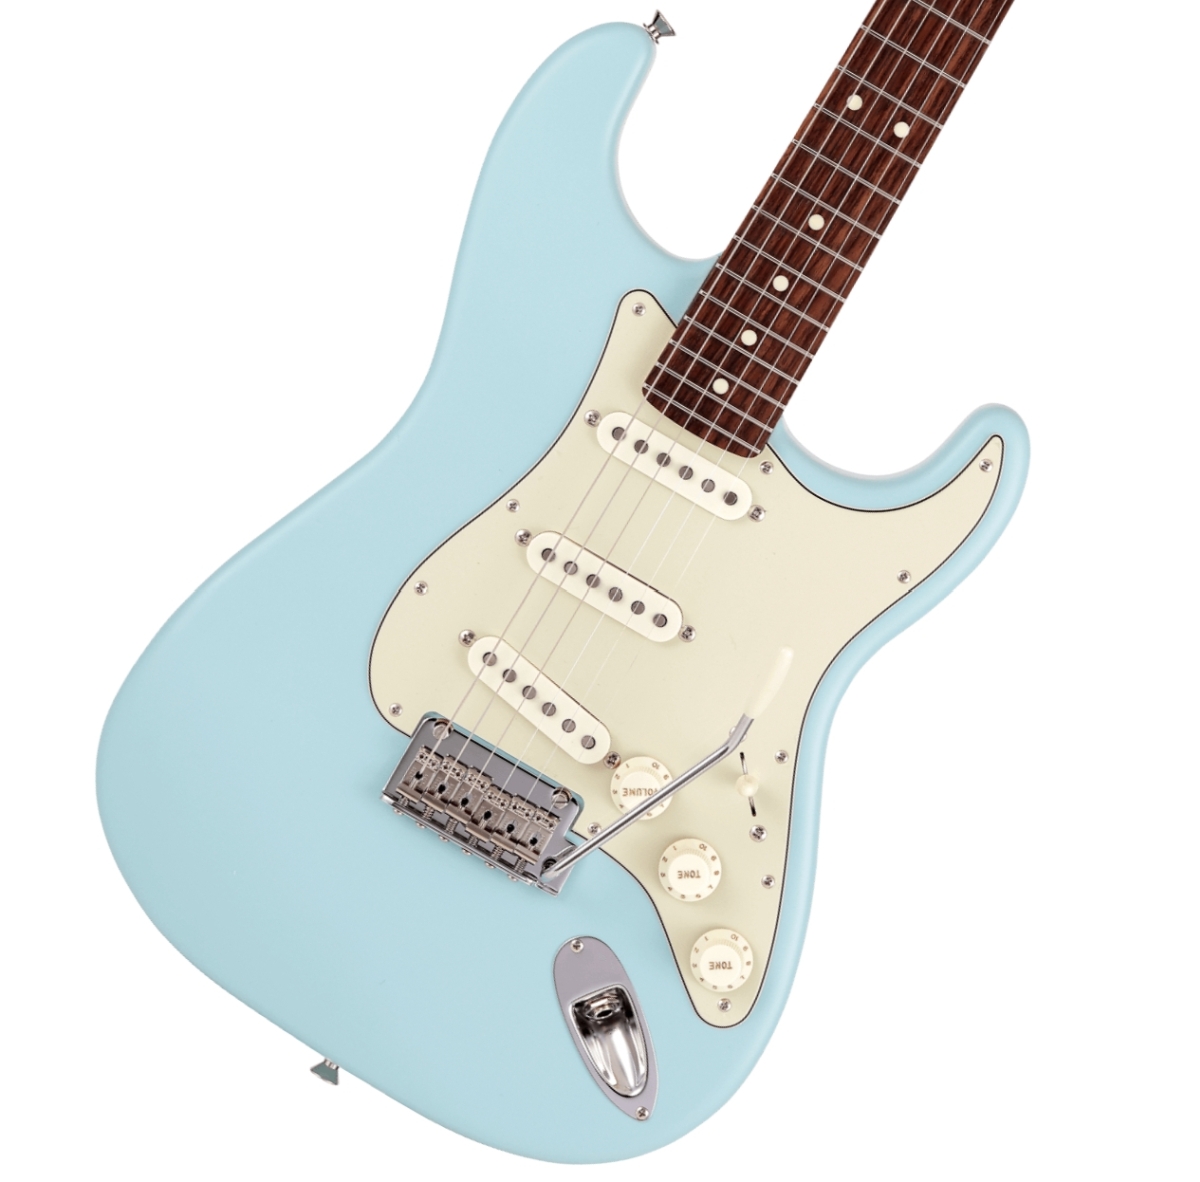 Satin　in　[ショートスケール]　Rosewood　Blue　Collection　Fender　Junior　Stratocaster　Made　イシバシ楽器　Daphne　Japan　Fingerboard　フェンダー